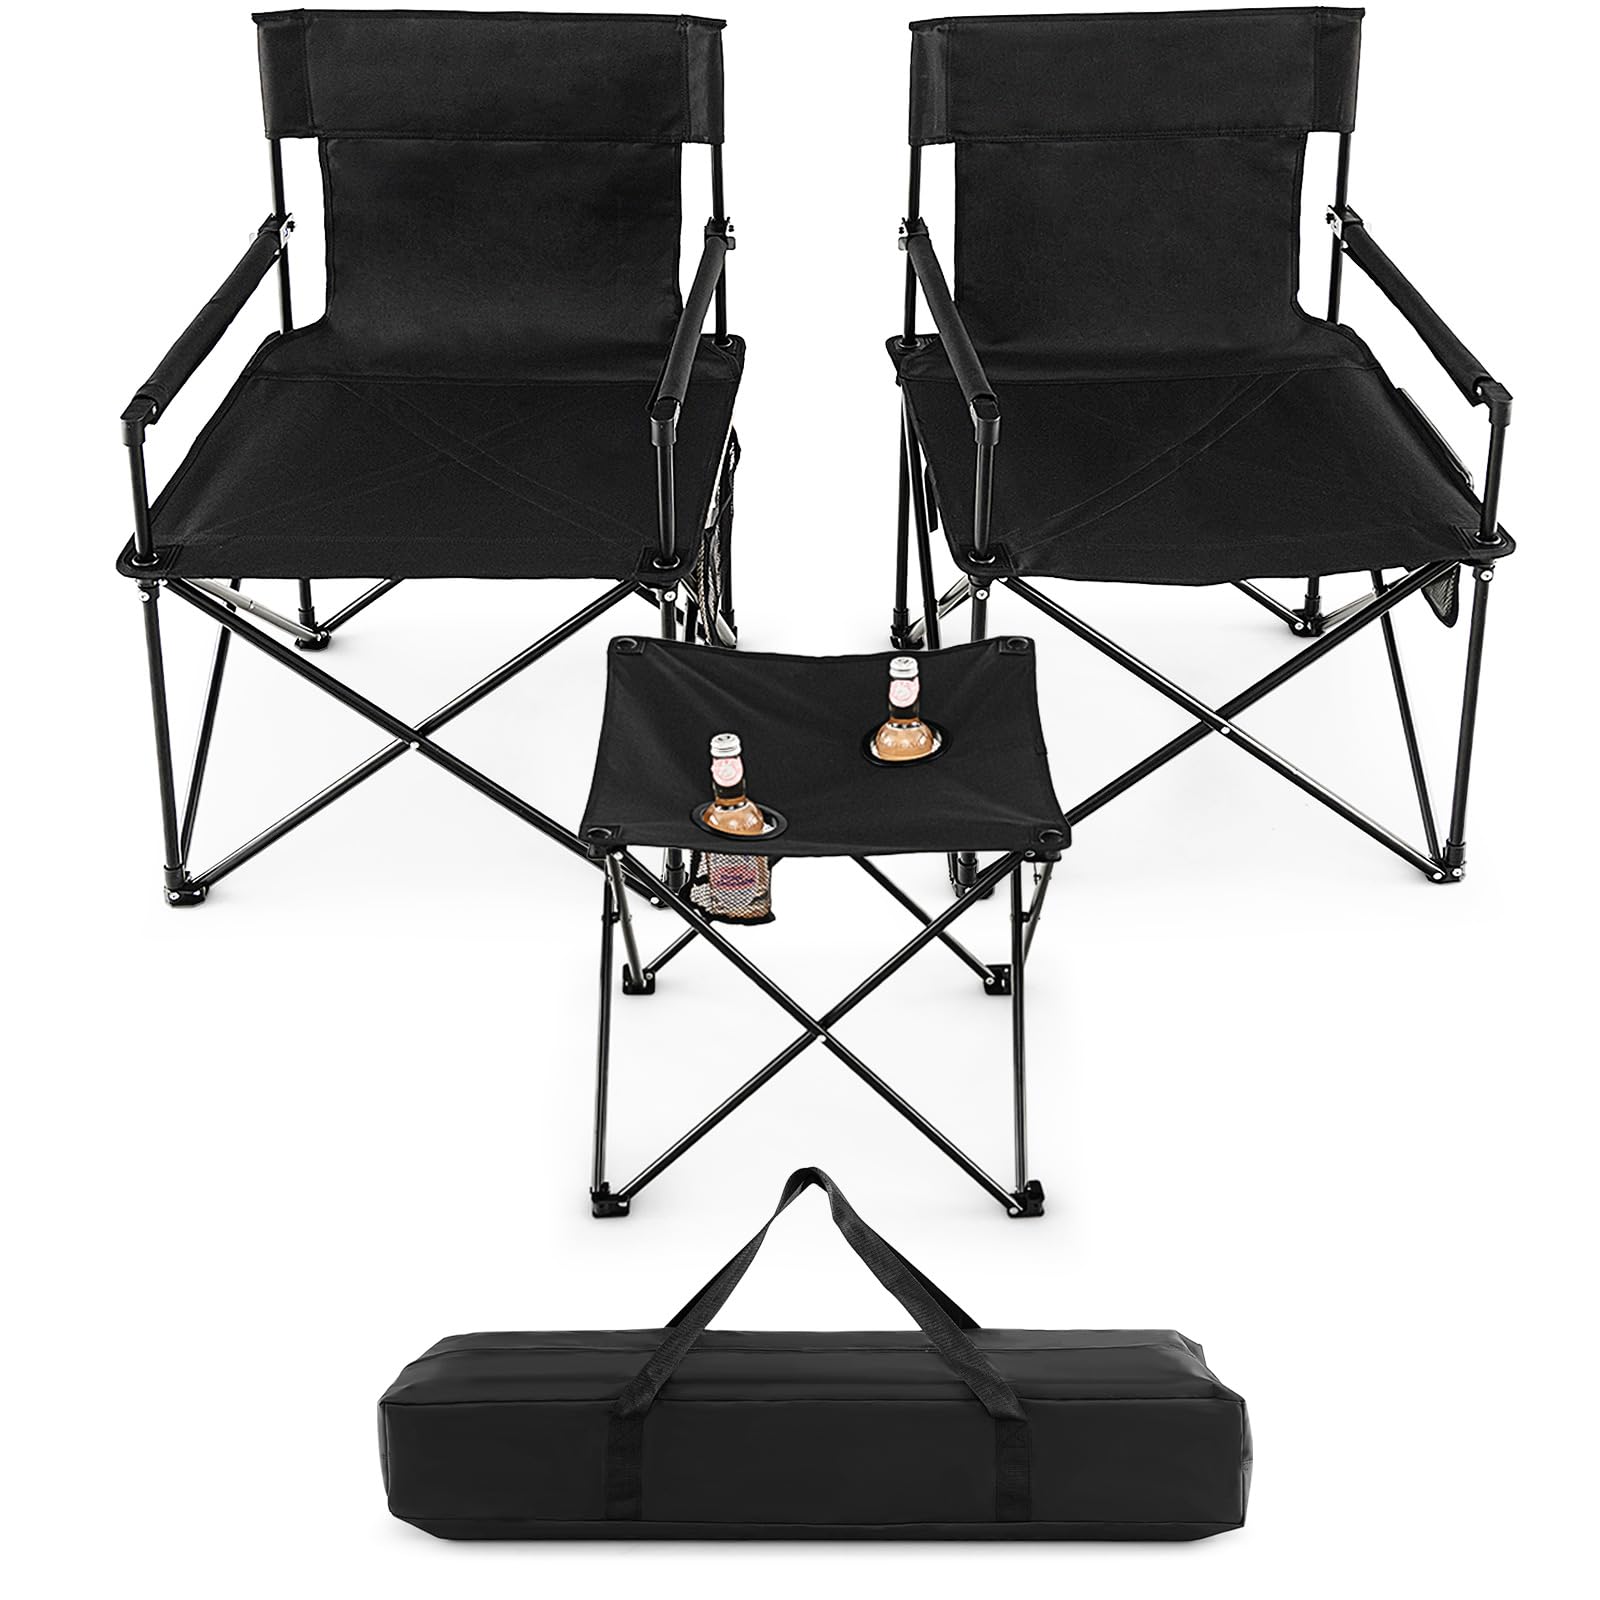 Giantex Camping Chair and Table Set - 3 Pack Folding Beach Chair with Side Table, 2 Cup Holders, Storage Pockets